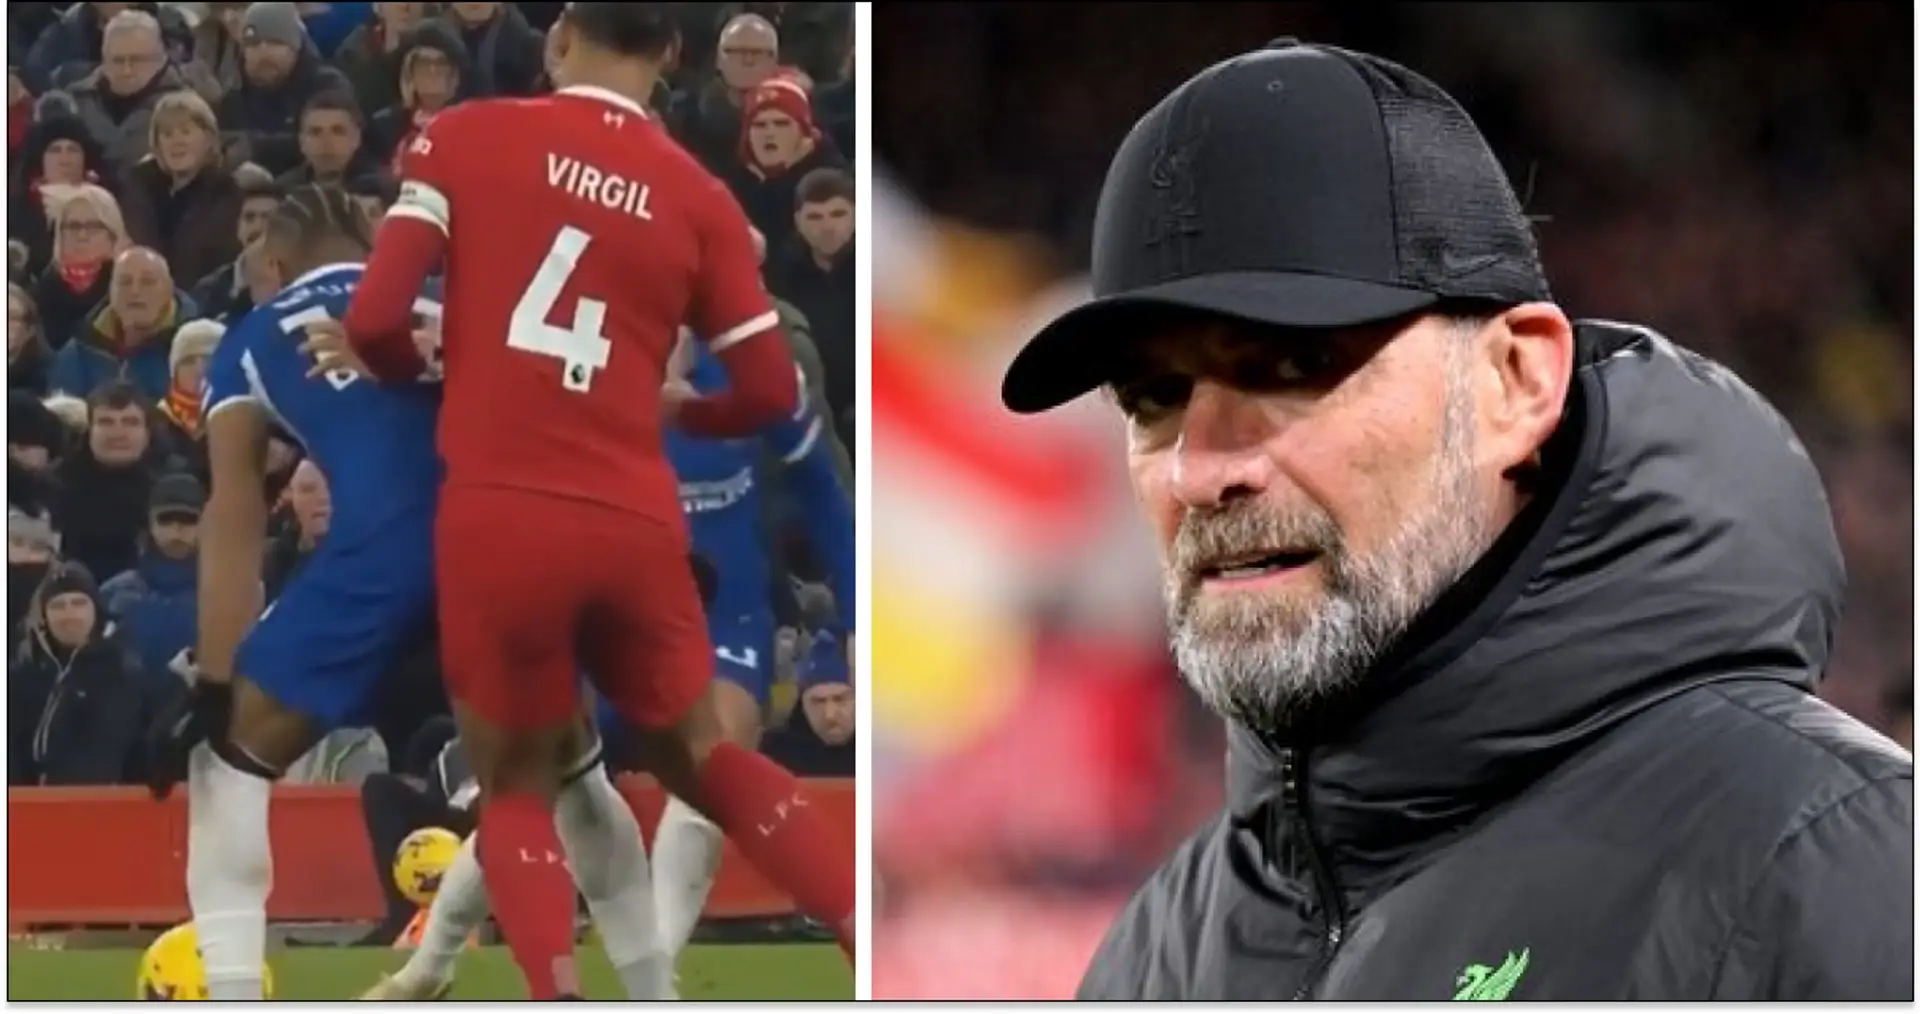 'Premier League want a Liverpool fairytale story': Another time referee denied Chelsea pen spotted